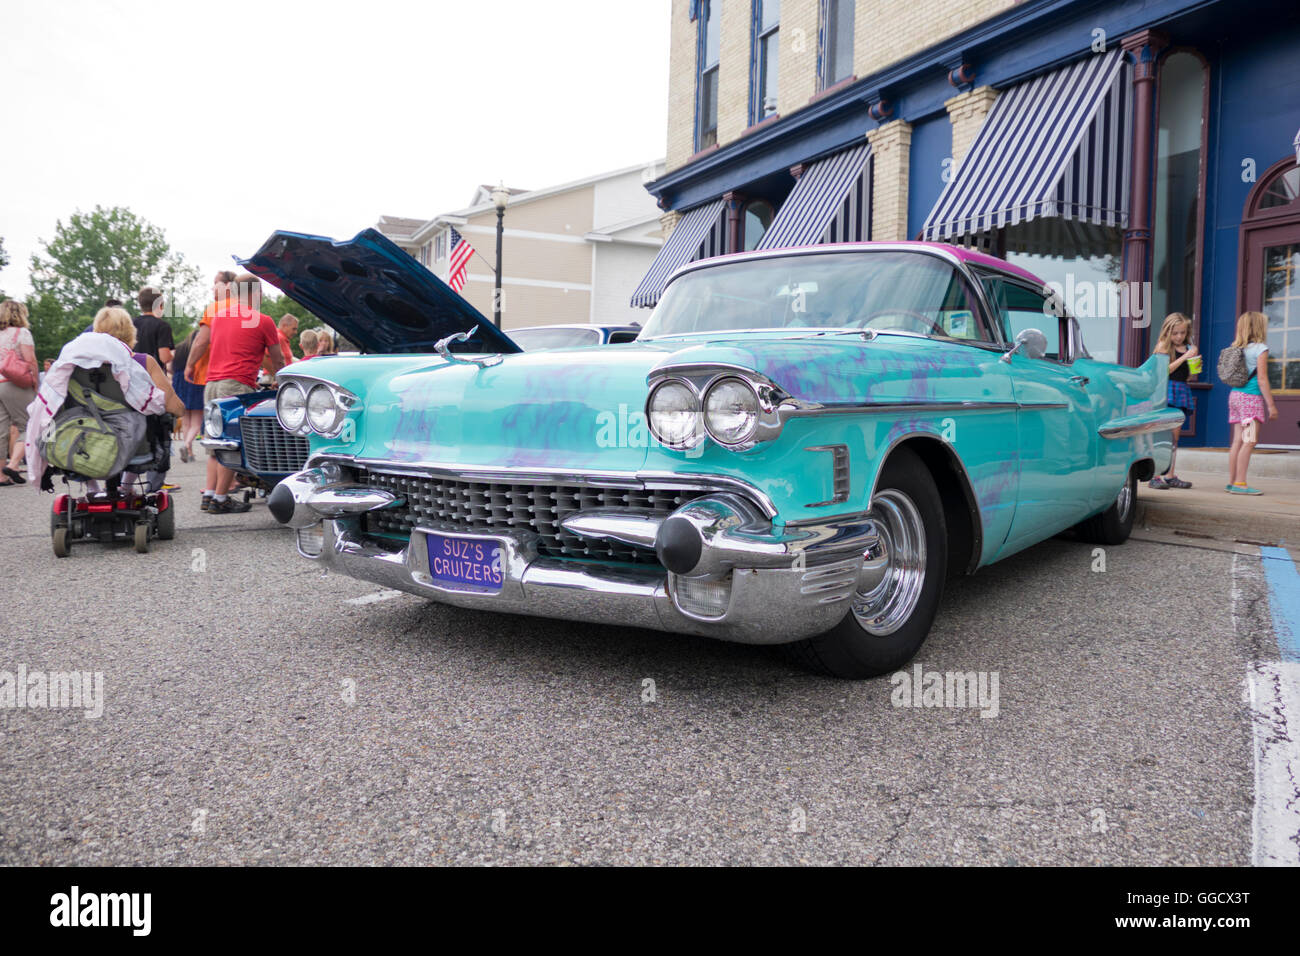 1958 Cadillac parked in a viewing area following the 2016 Annual Cruz In Parade through Whitehall and Montague, Michigan. Stock Photo